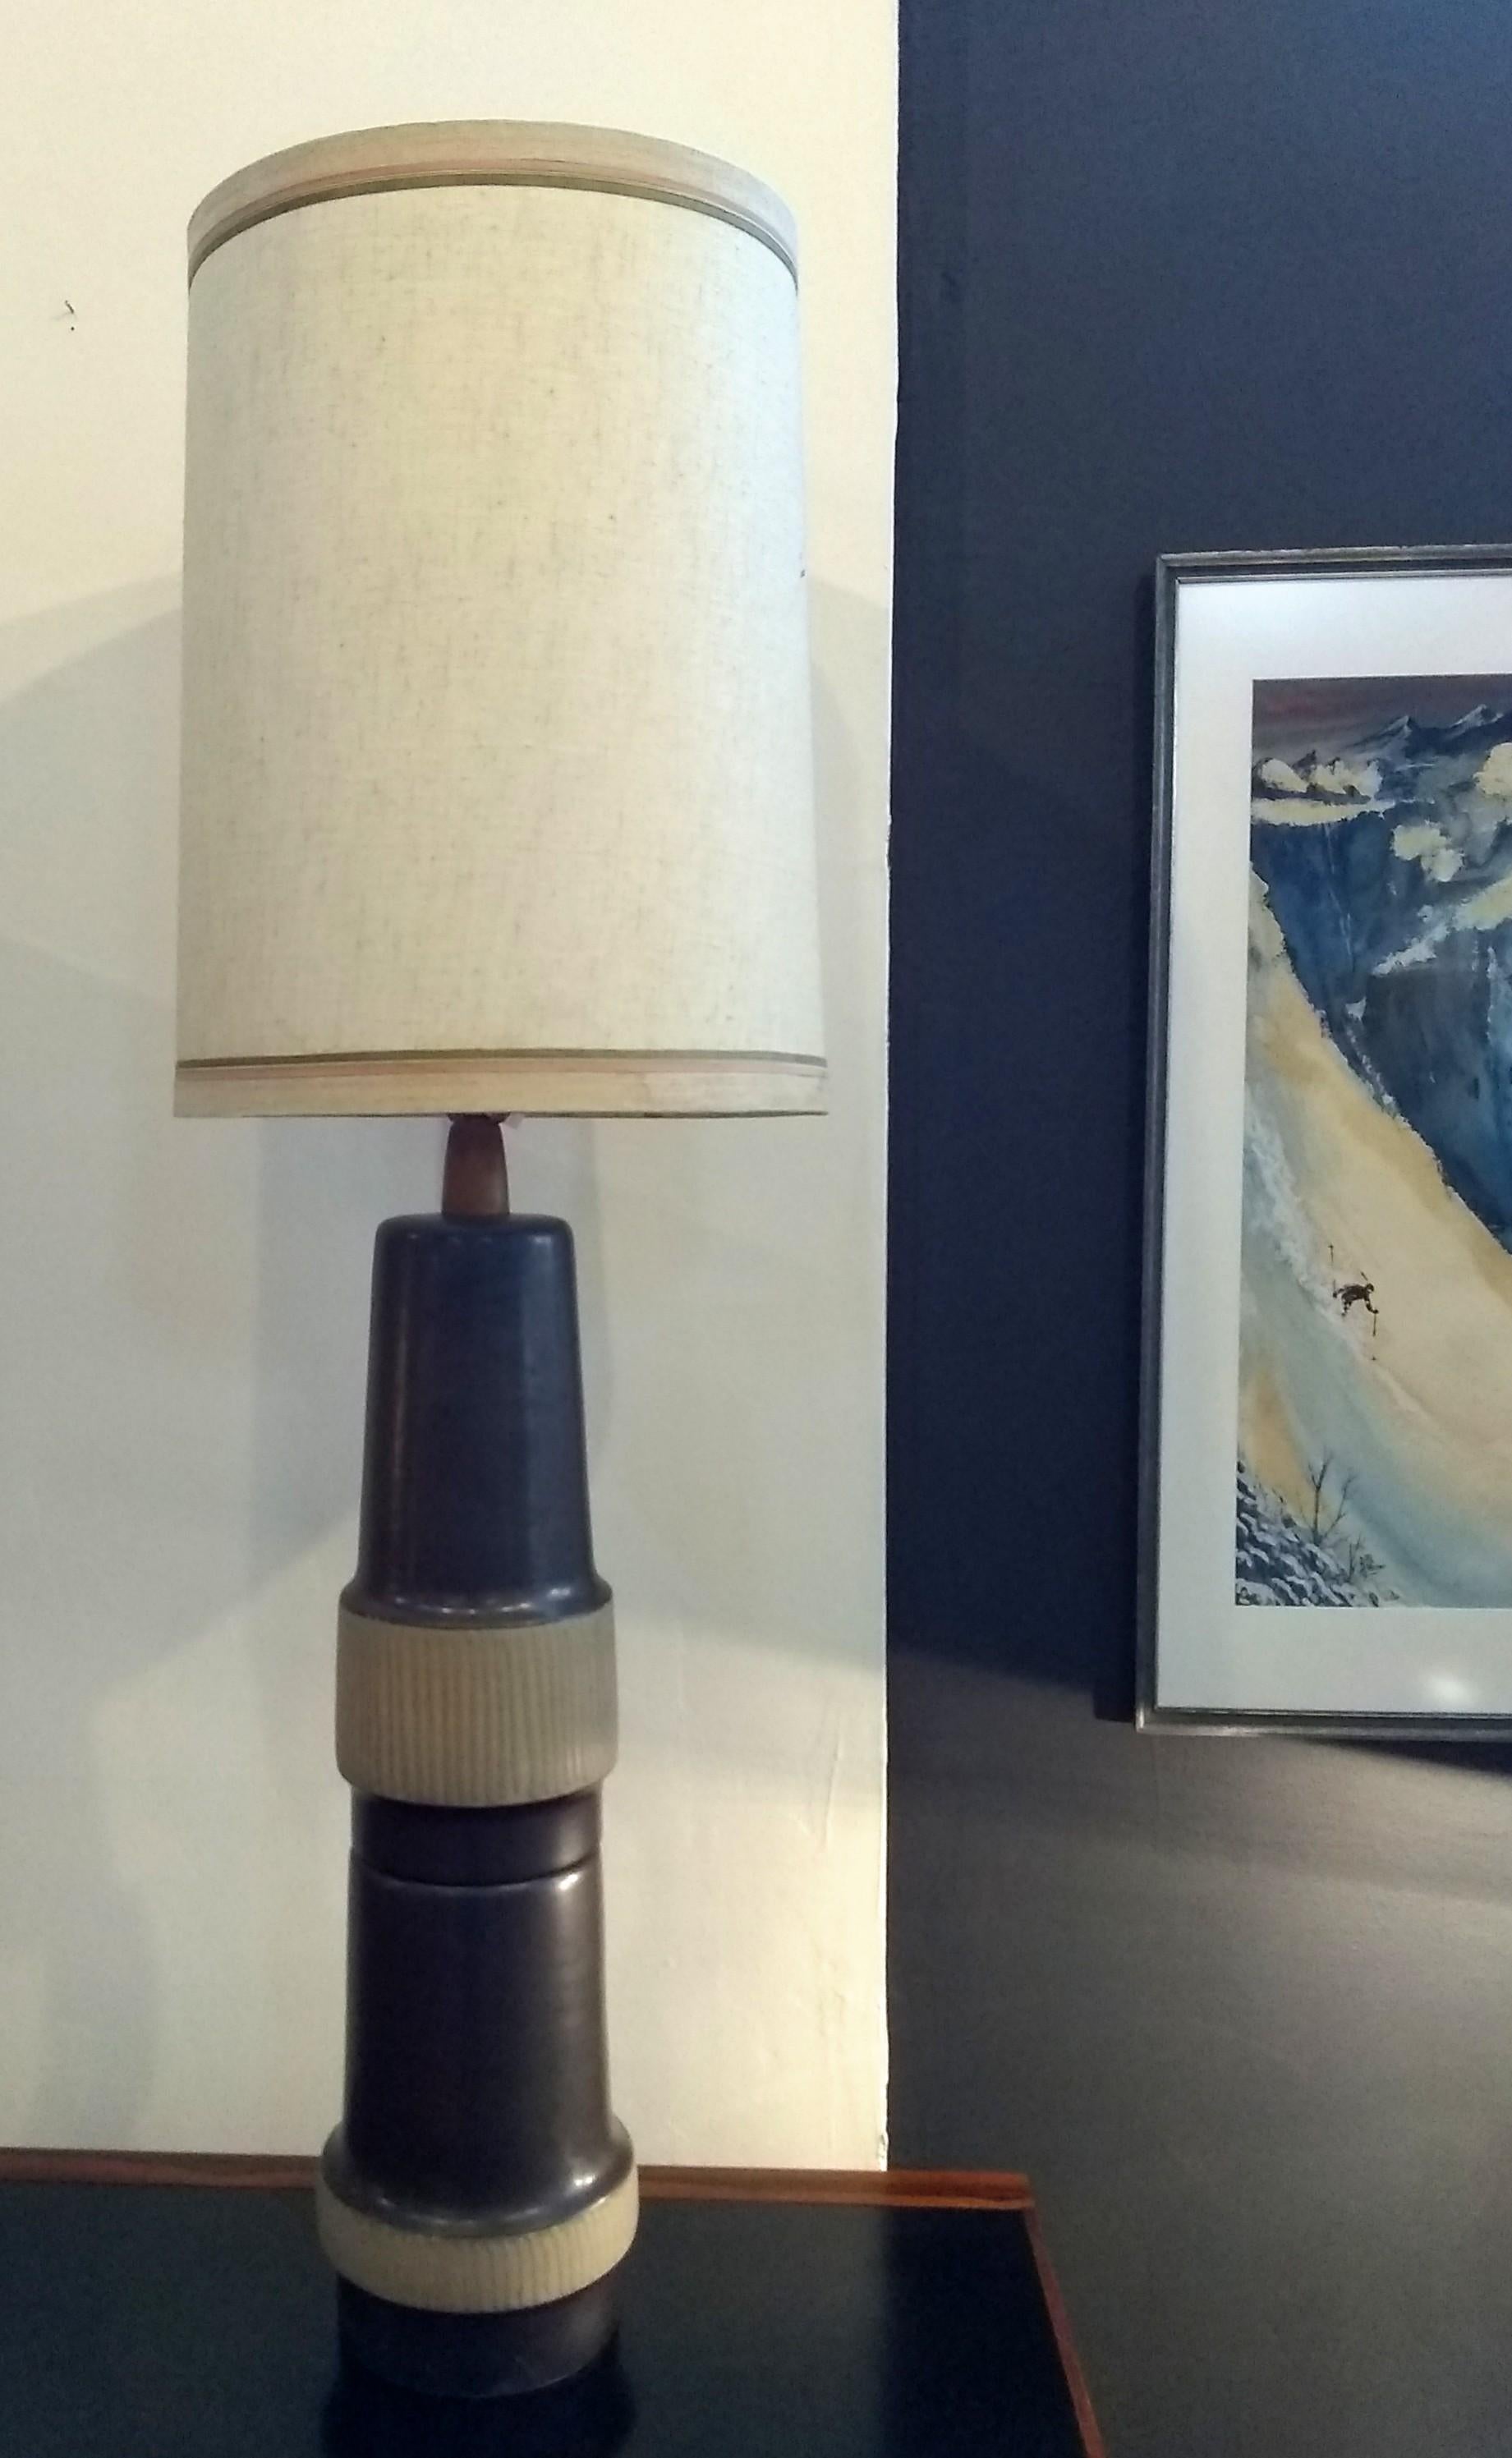 This amazing, soaring table lamp was designed by Gordon & Jane Martz and manufactured at their Marshall Studios facility in Veedersburg, IN.  A wonderful example of handmade modernist studio ceramics.

Non-original shade and finial, priced